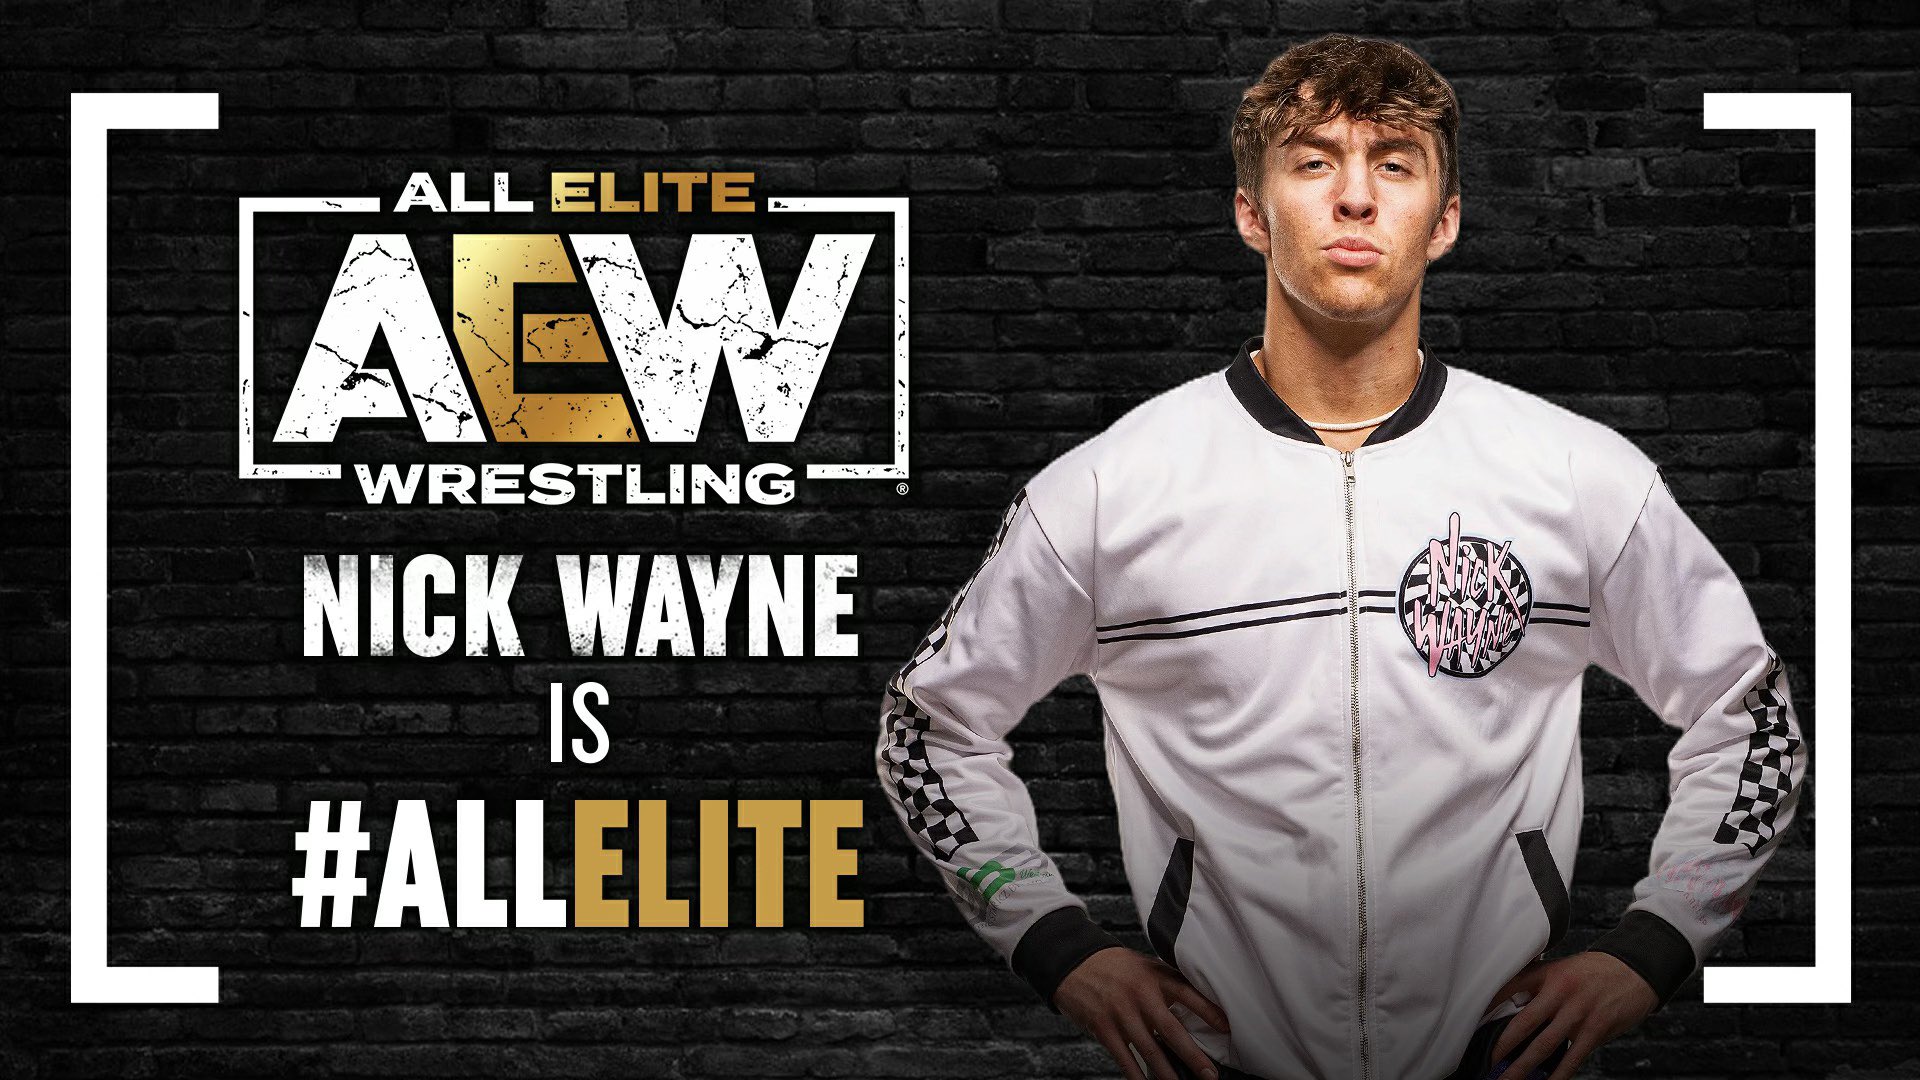 The #AllElite match graphic for Nick Wayne.